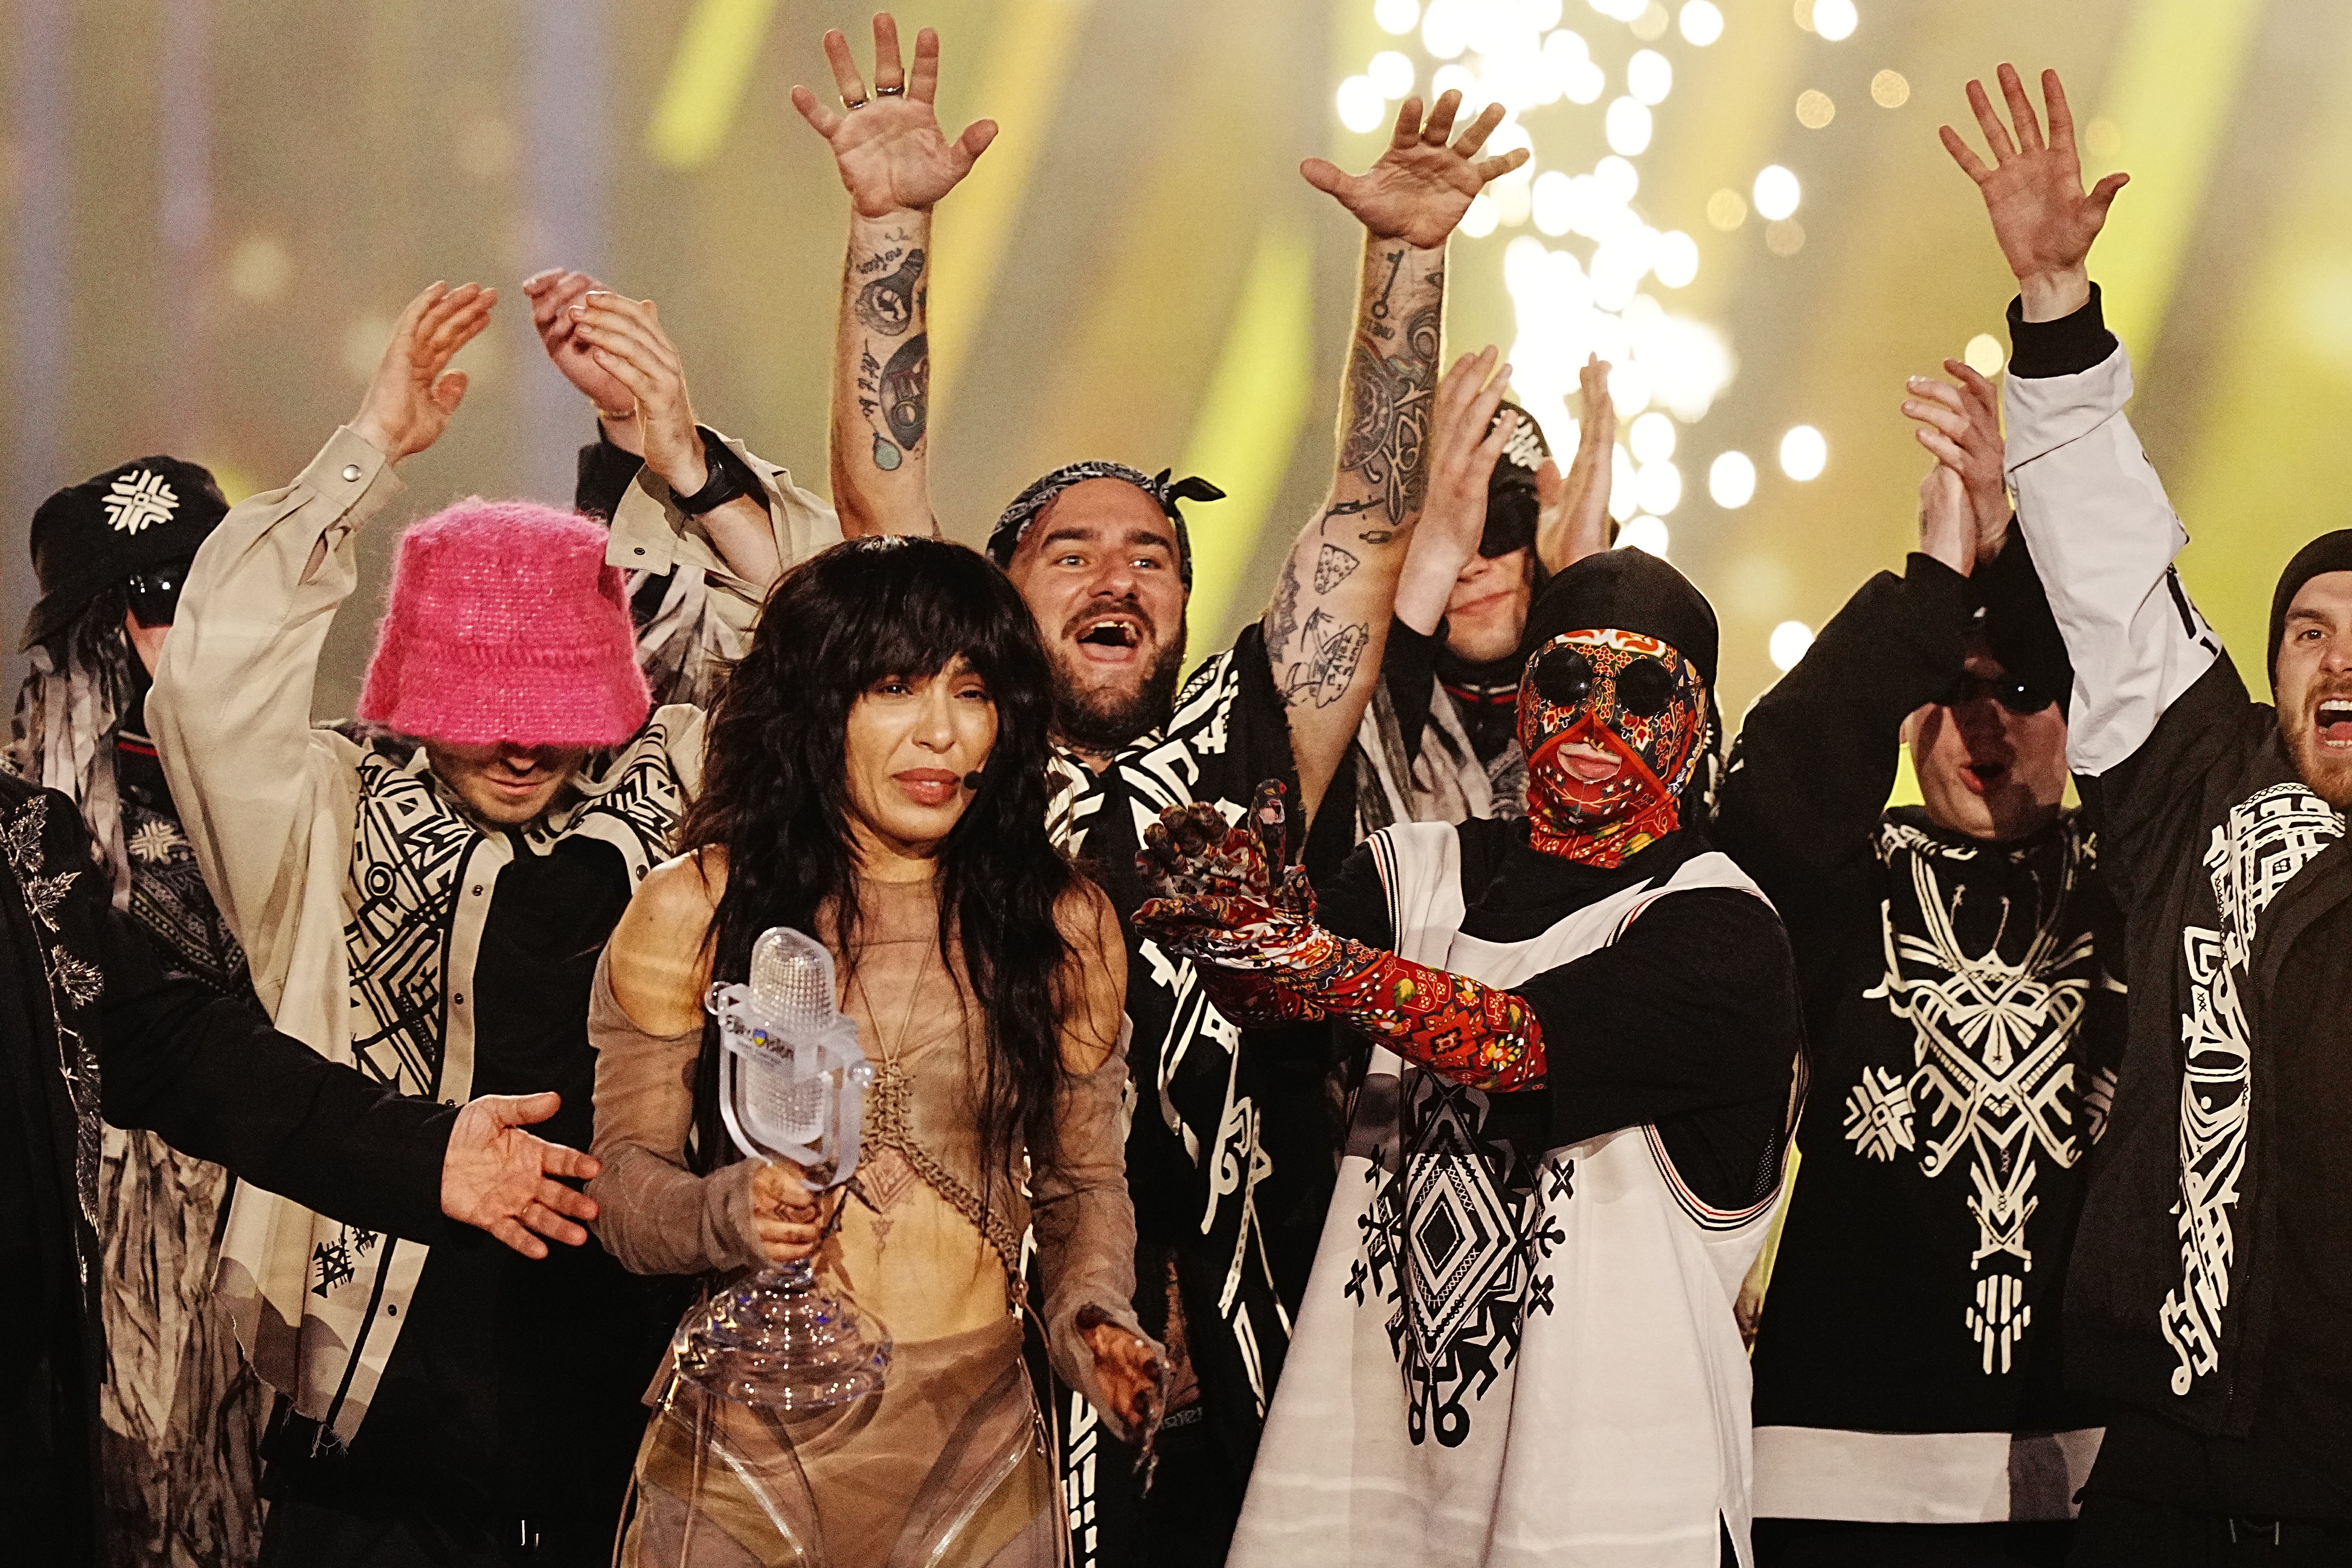 This year’s competition will take place in Sweden following Loreen’s victory